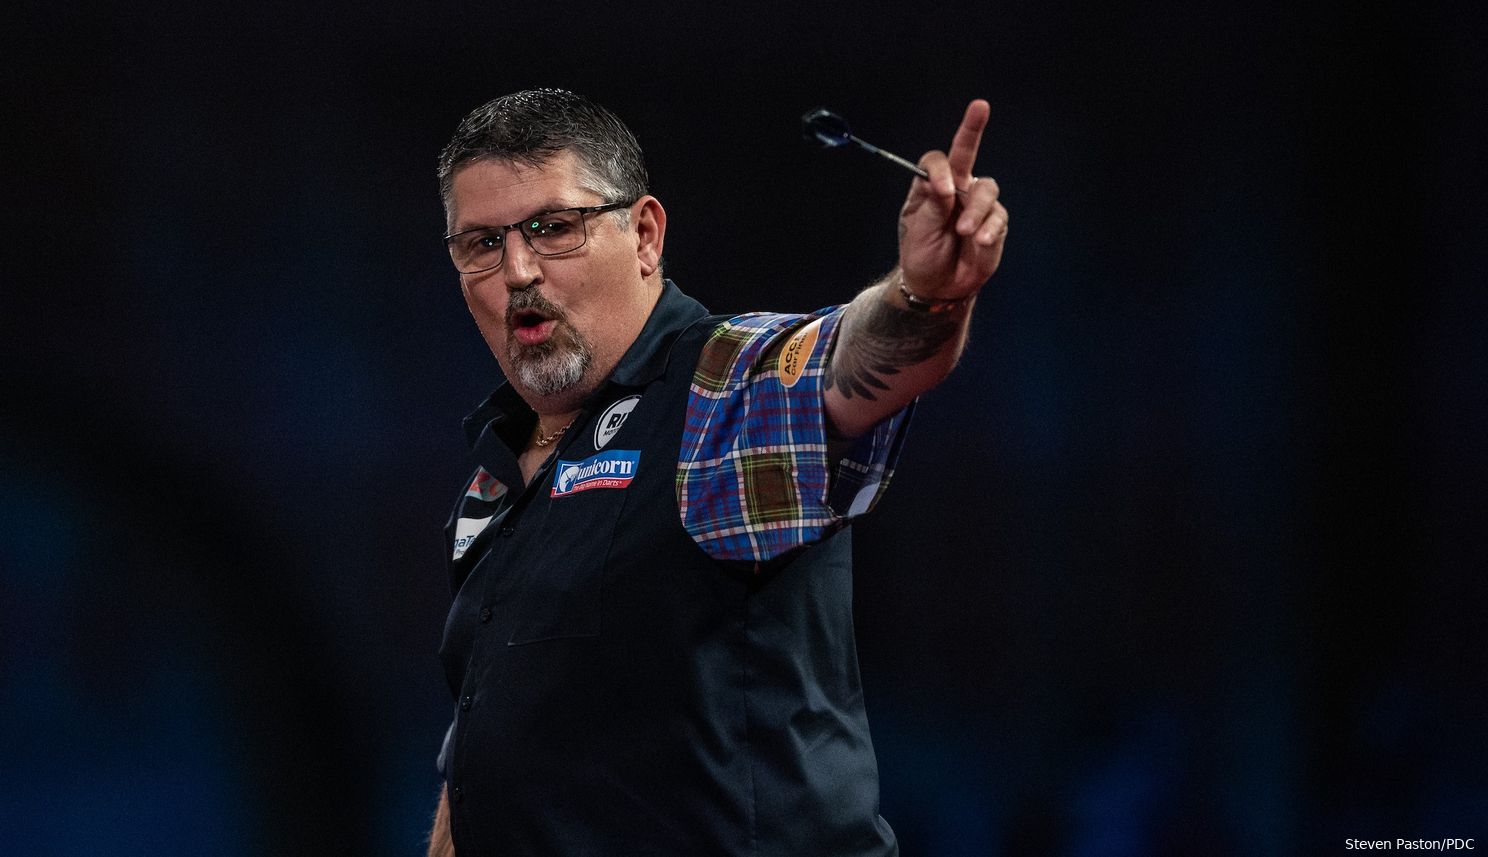 latest news about Anderson - Dartsnews.com